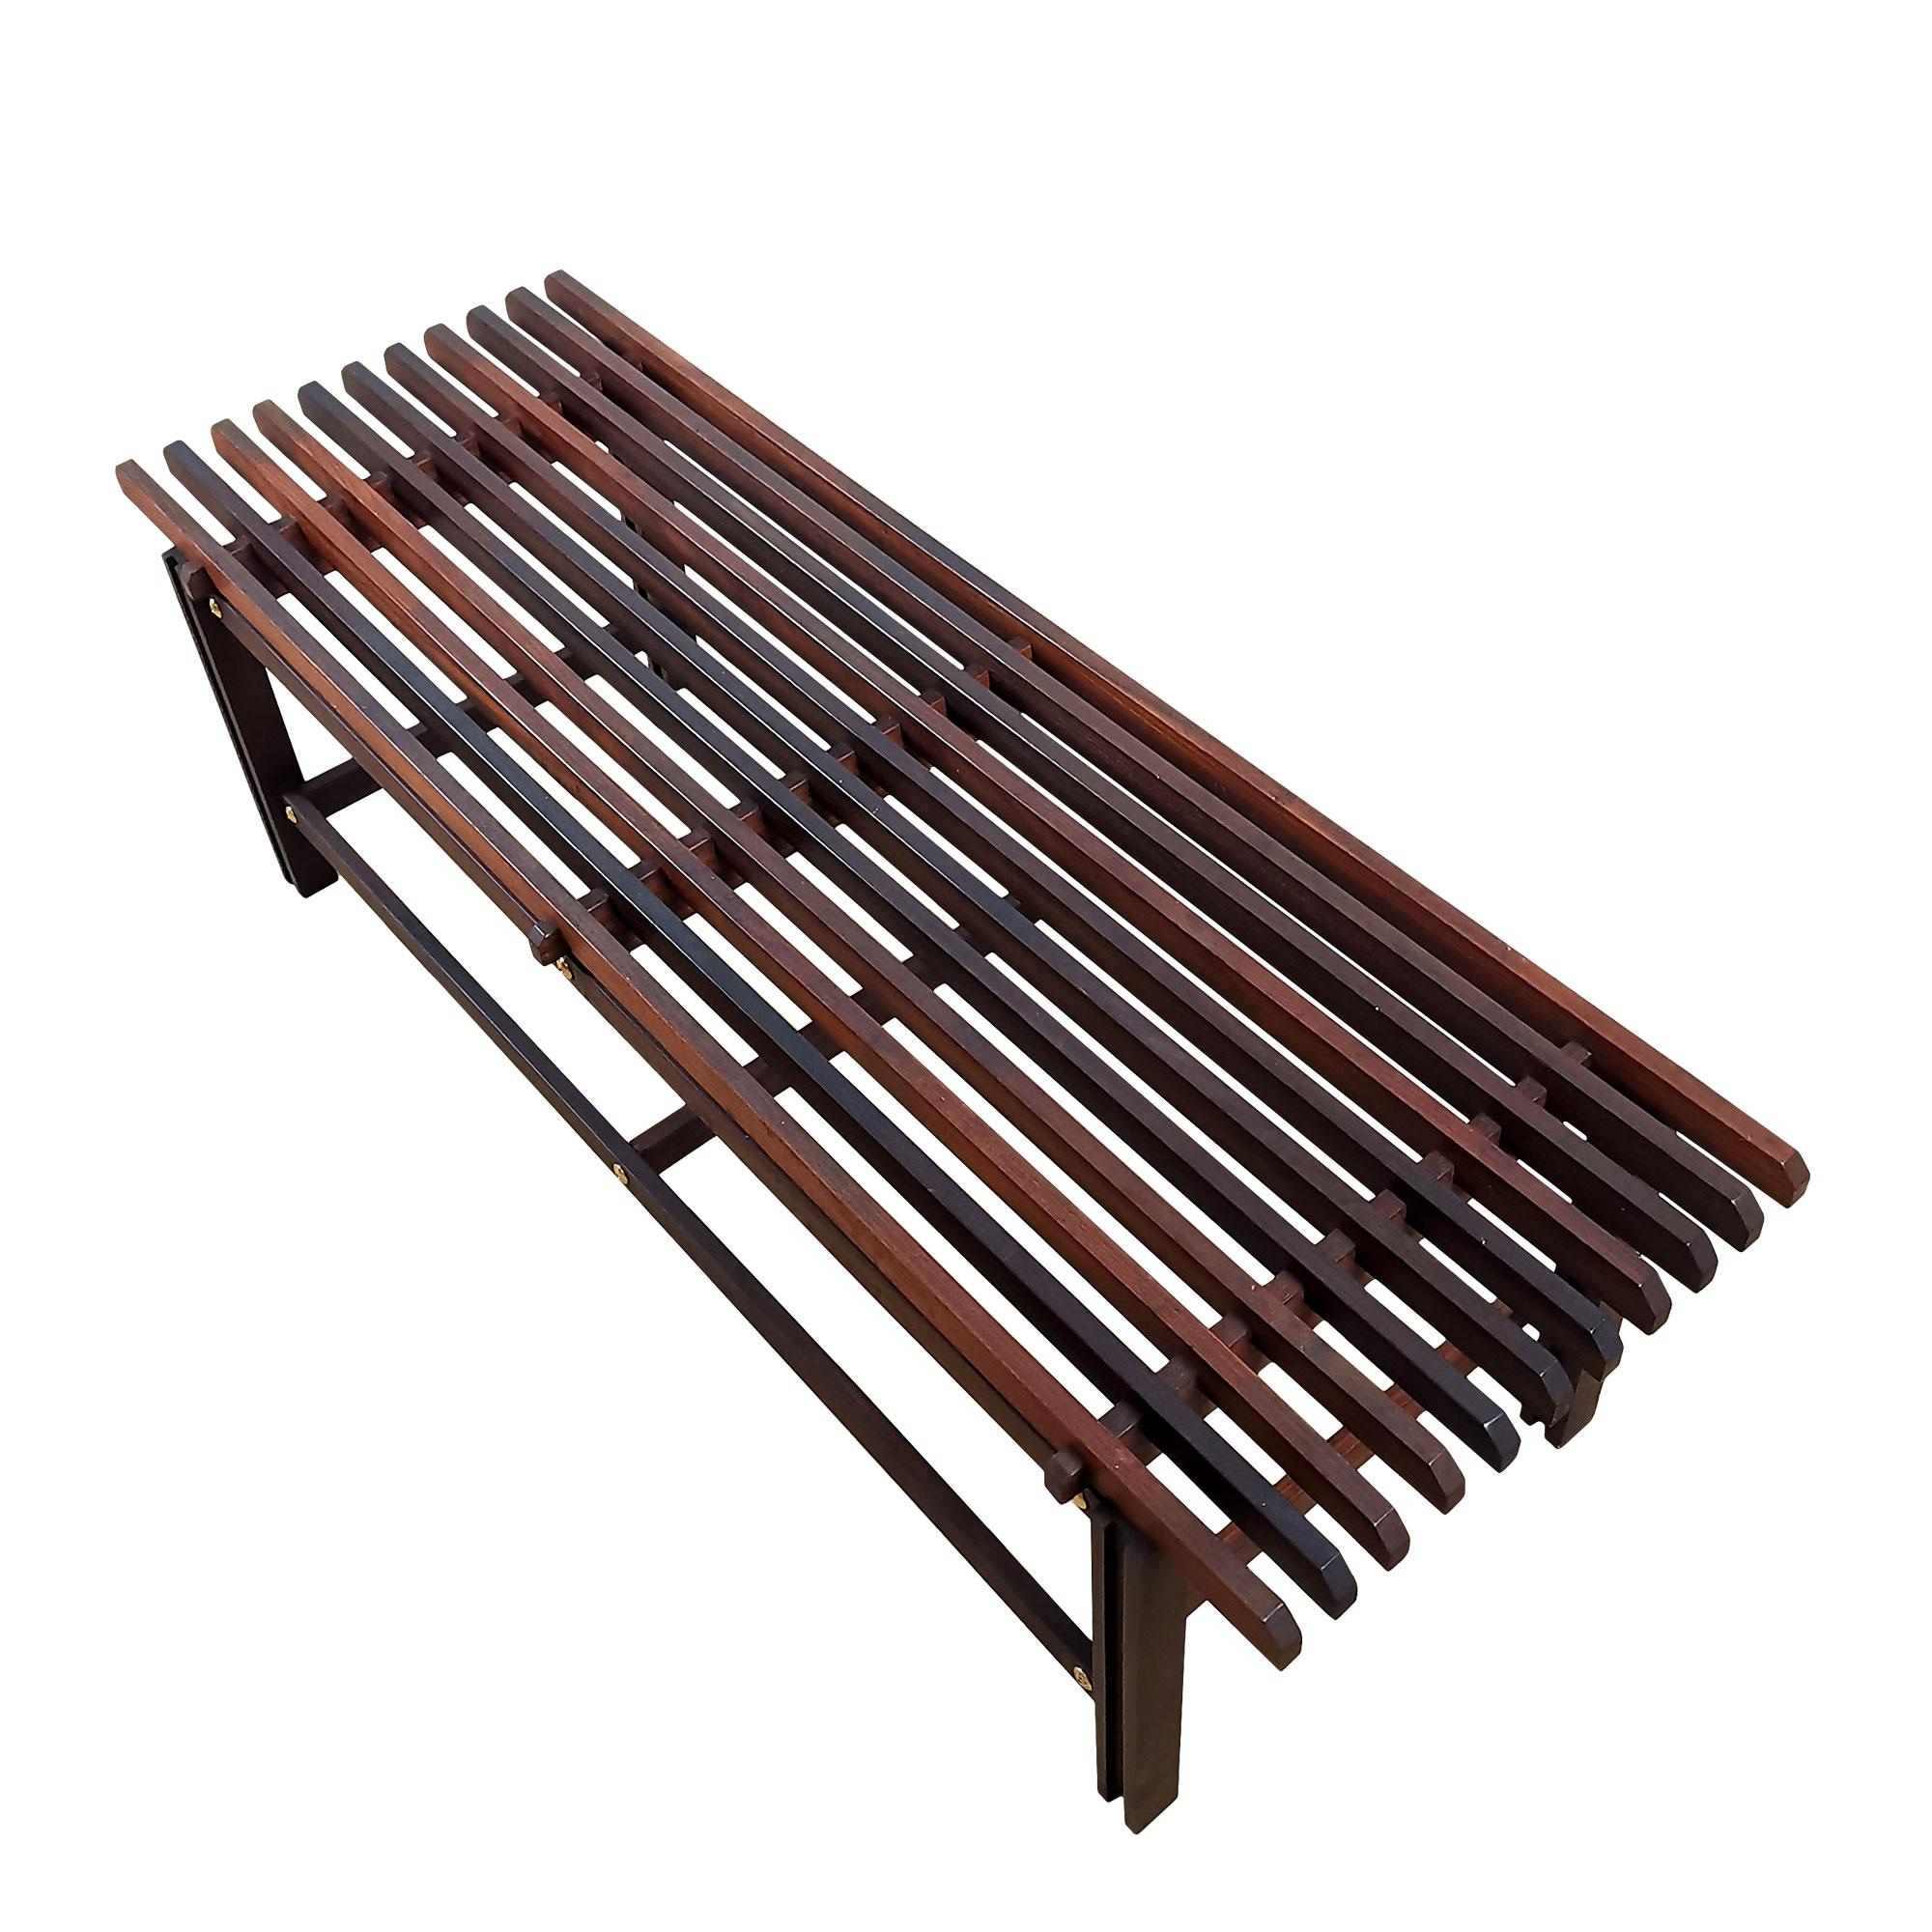 Bench in solid teak slats with brass finishes. Original satin varnish. Very nice quality.

